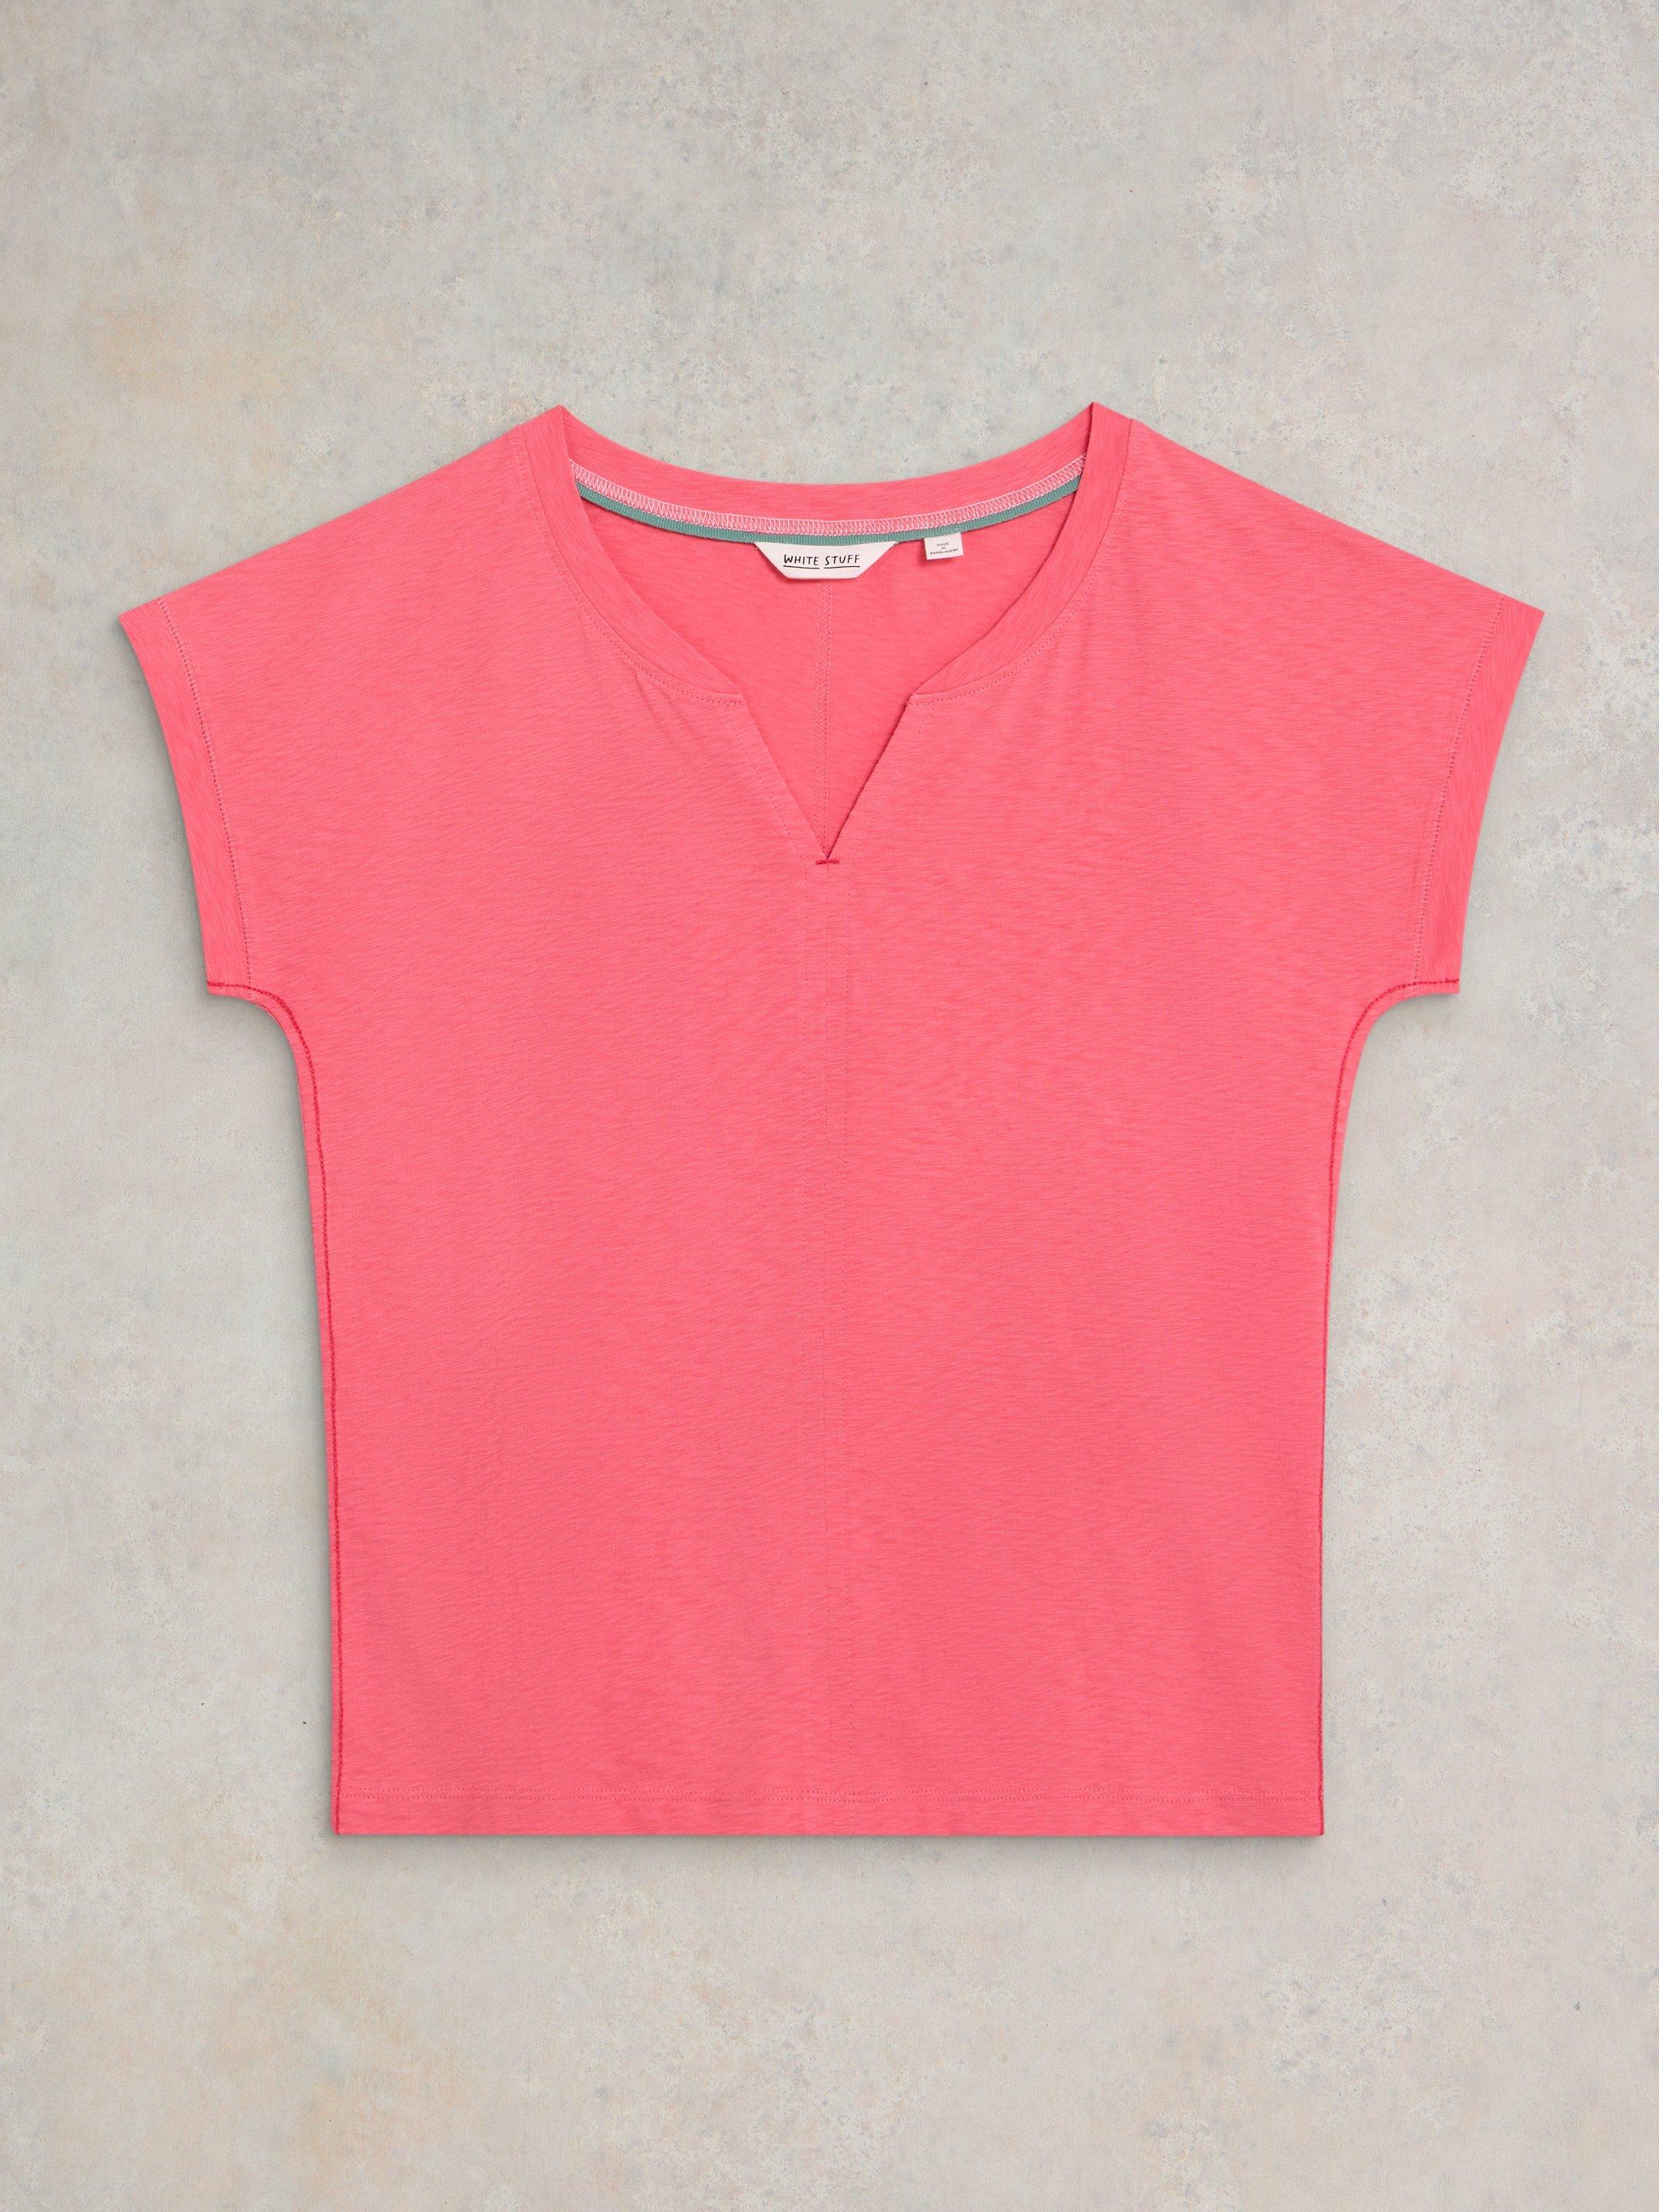 NELLY NOTCH NECK COTTON TEE in LGT PINK - FLAT FRONT